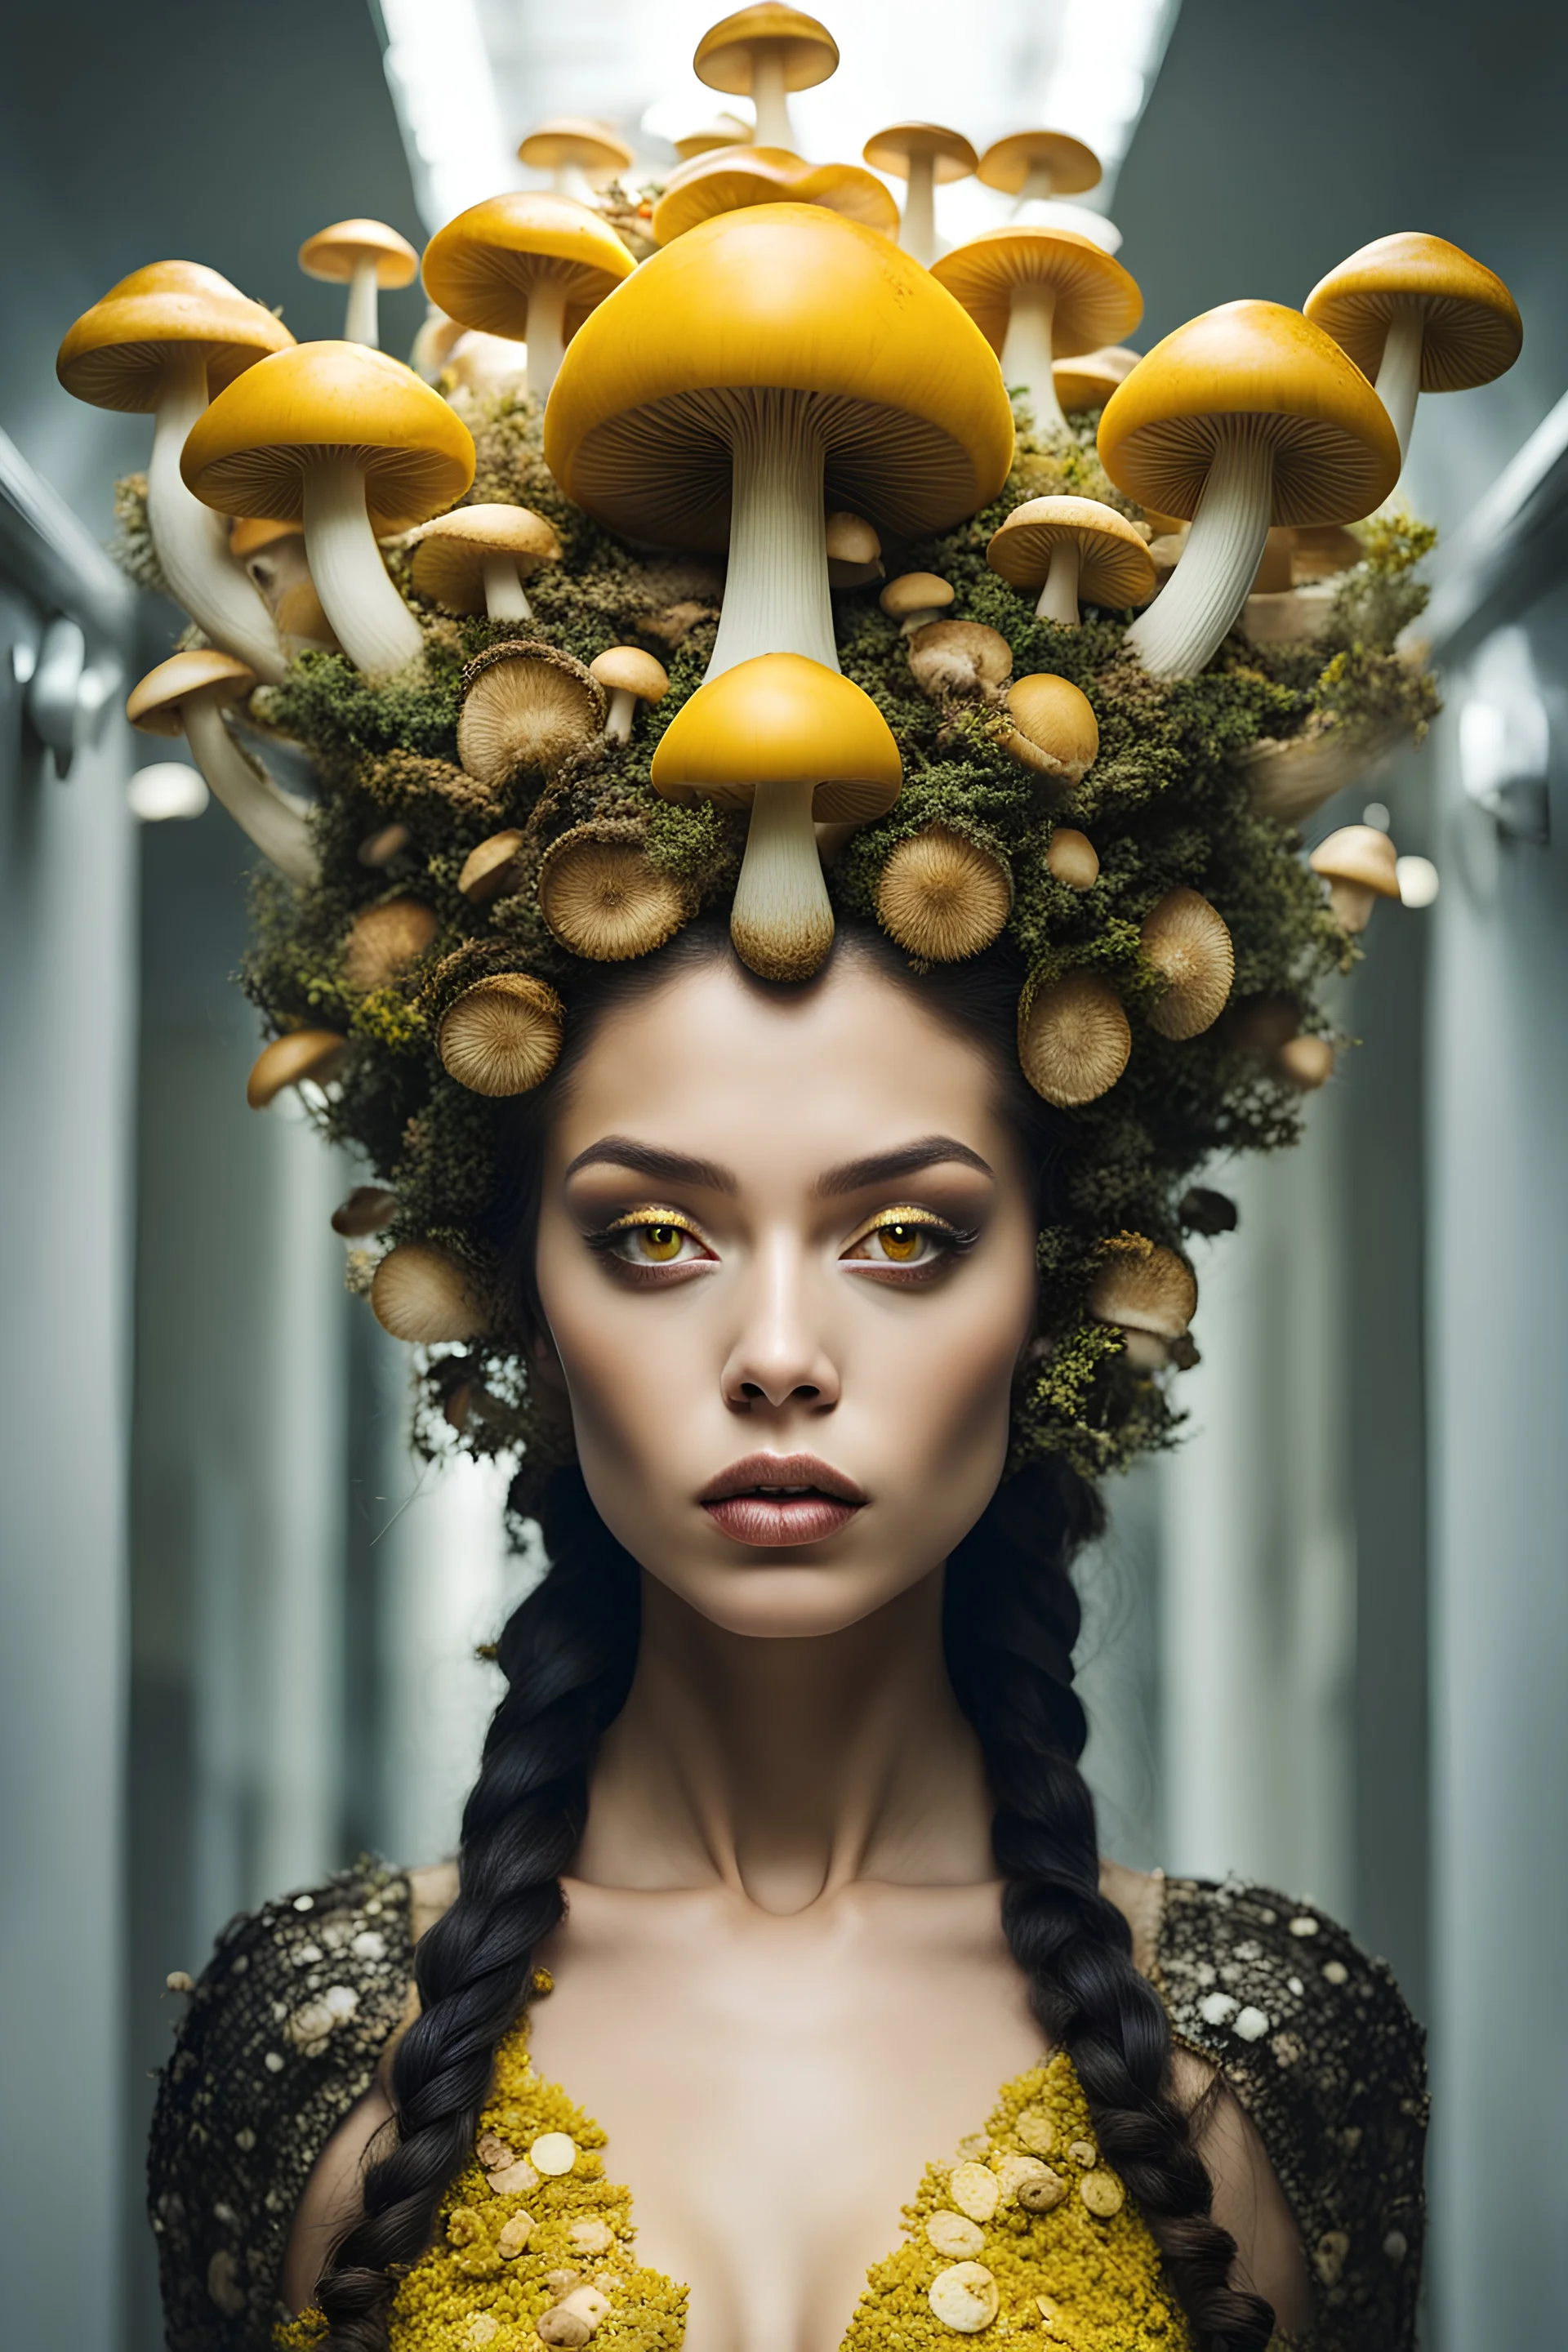 a very beautiful woman, with several mushrooms coming out of her head forming a crown, large, alien yellow eyes, thick lips, with a carapace made of mushrooms covering her body, walking in a corridor